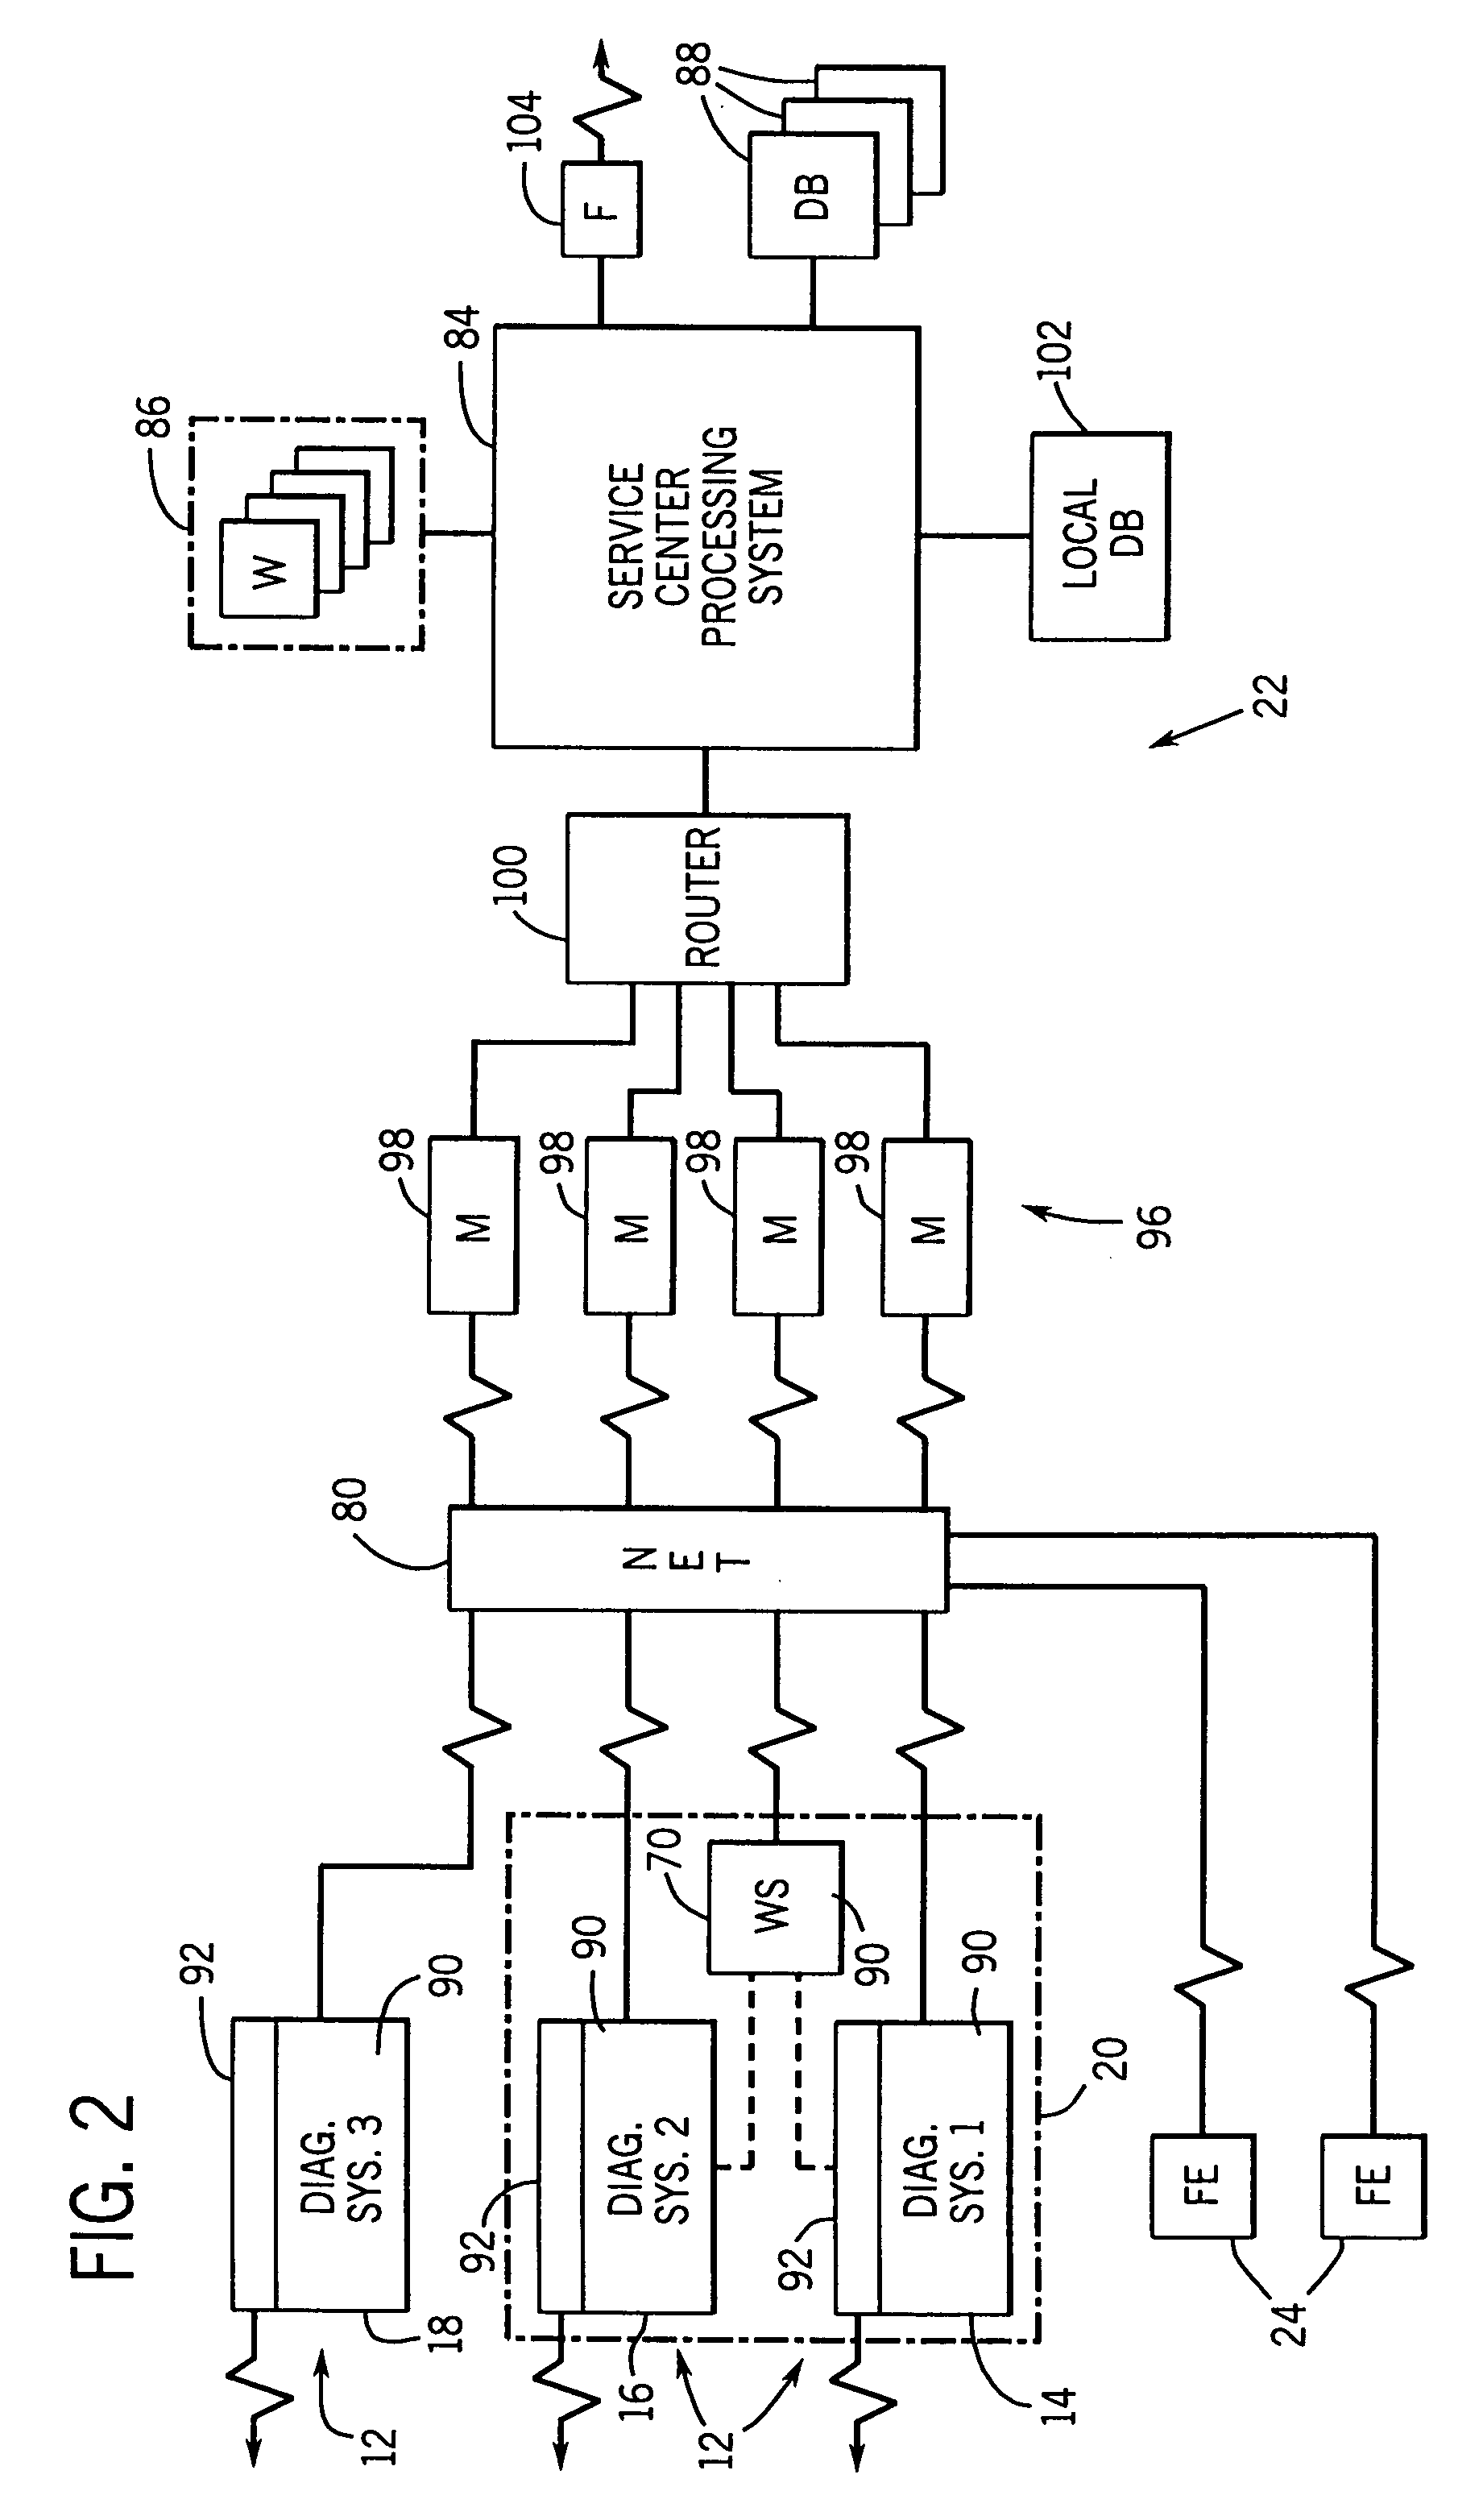 Medical diagnostic system service method and apparatus